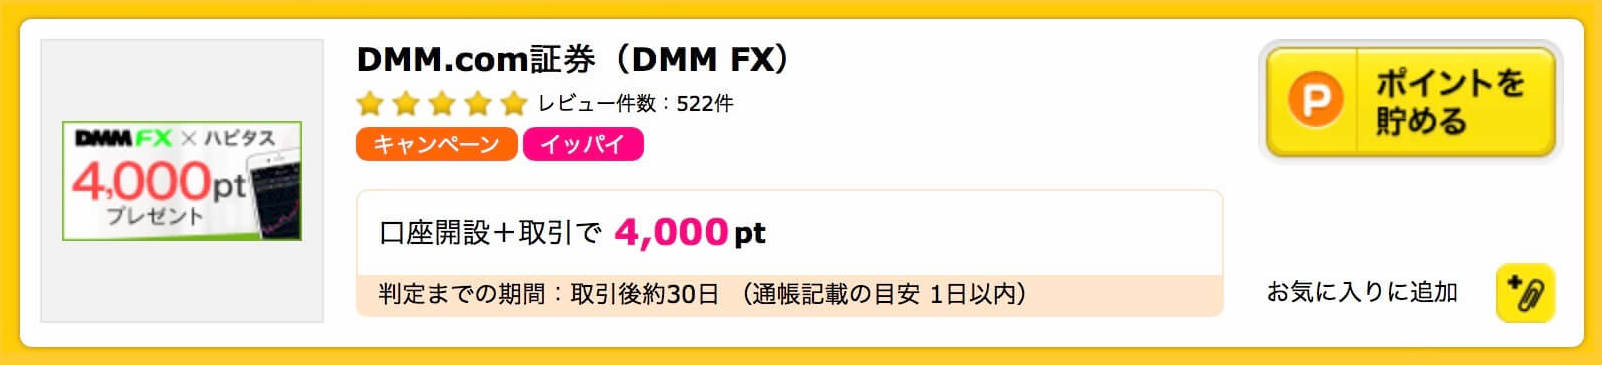 DMM FX_ハピタス